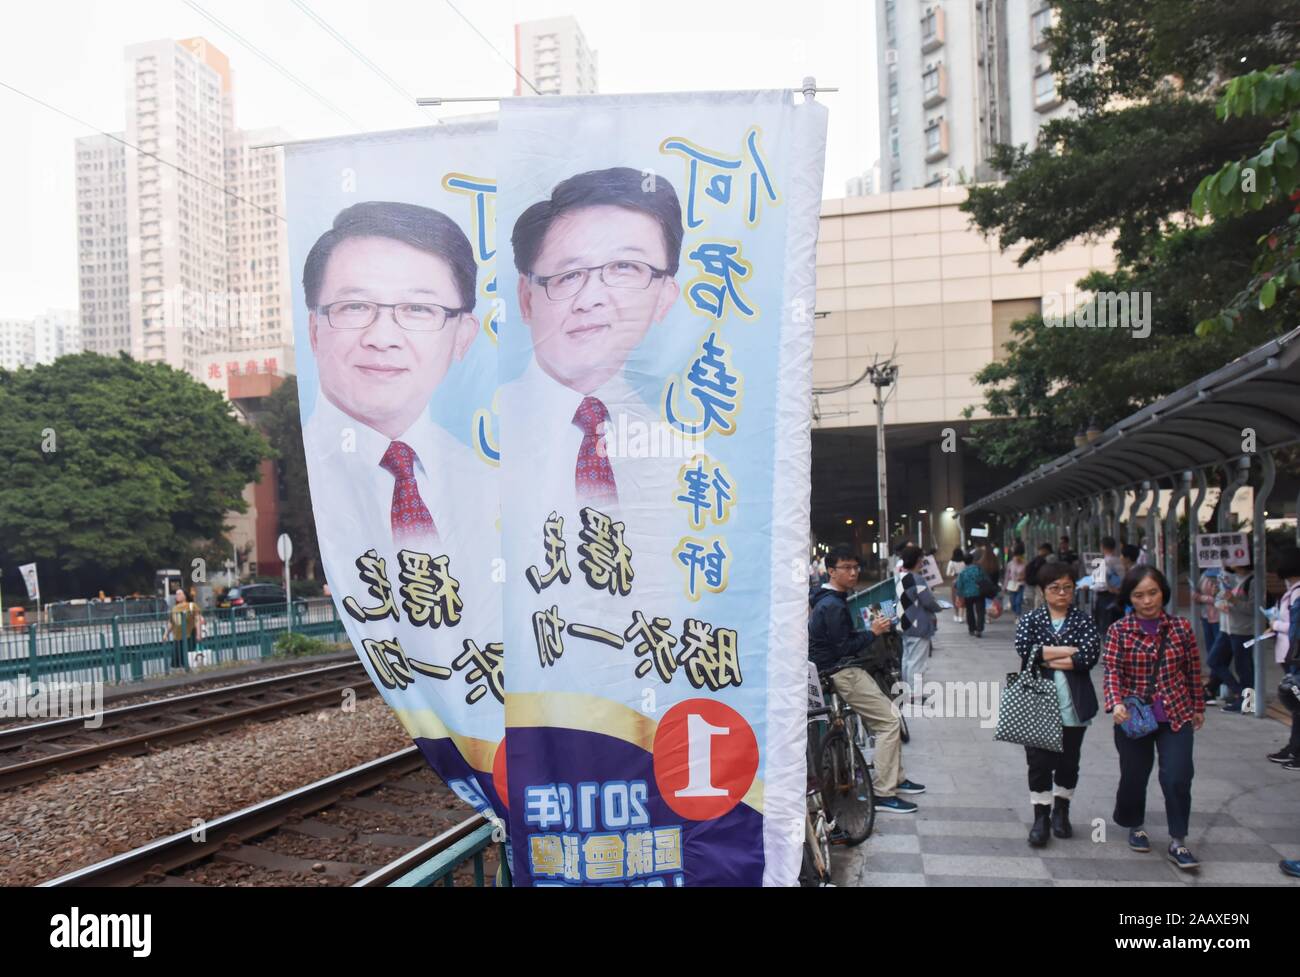 Banners of pro-establishment lawmaker candidate Junius Ho are seen in Tuen Mun district ahead of District Council Elections. Hong Kong held its district council election under a rare atmosphere of calm and peace after weeks of intense clashes at numerous universities between anti-government protesters and police which continue into its sixth month of demonstrations. Stock Photo